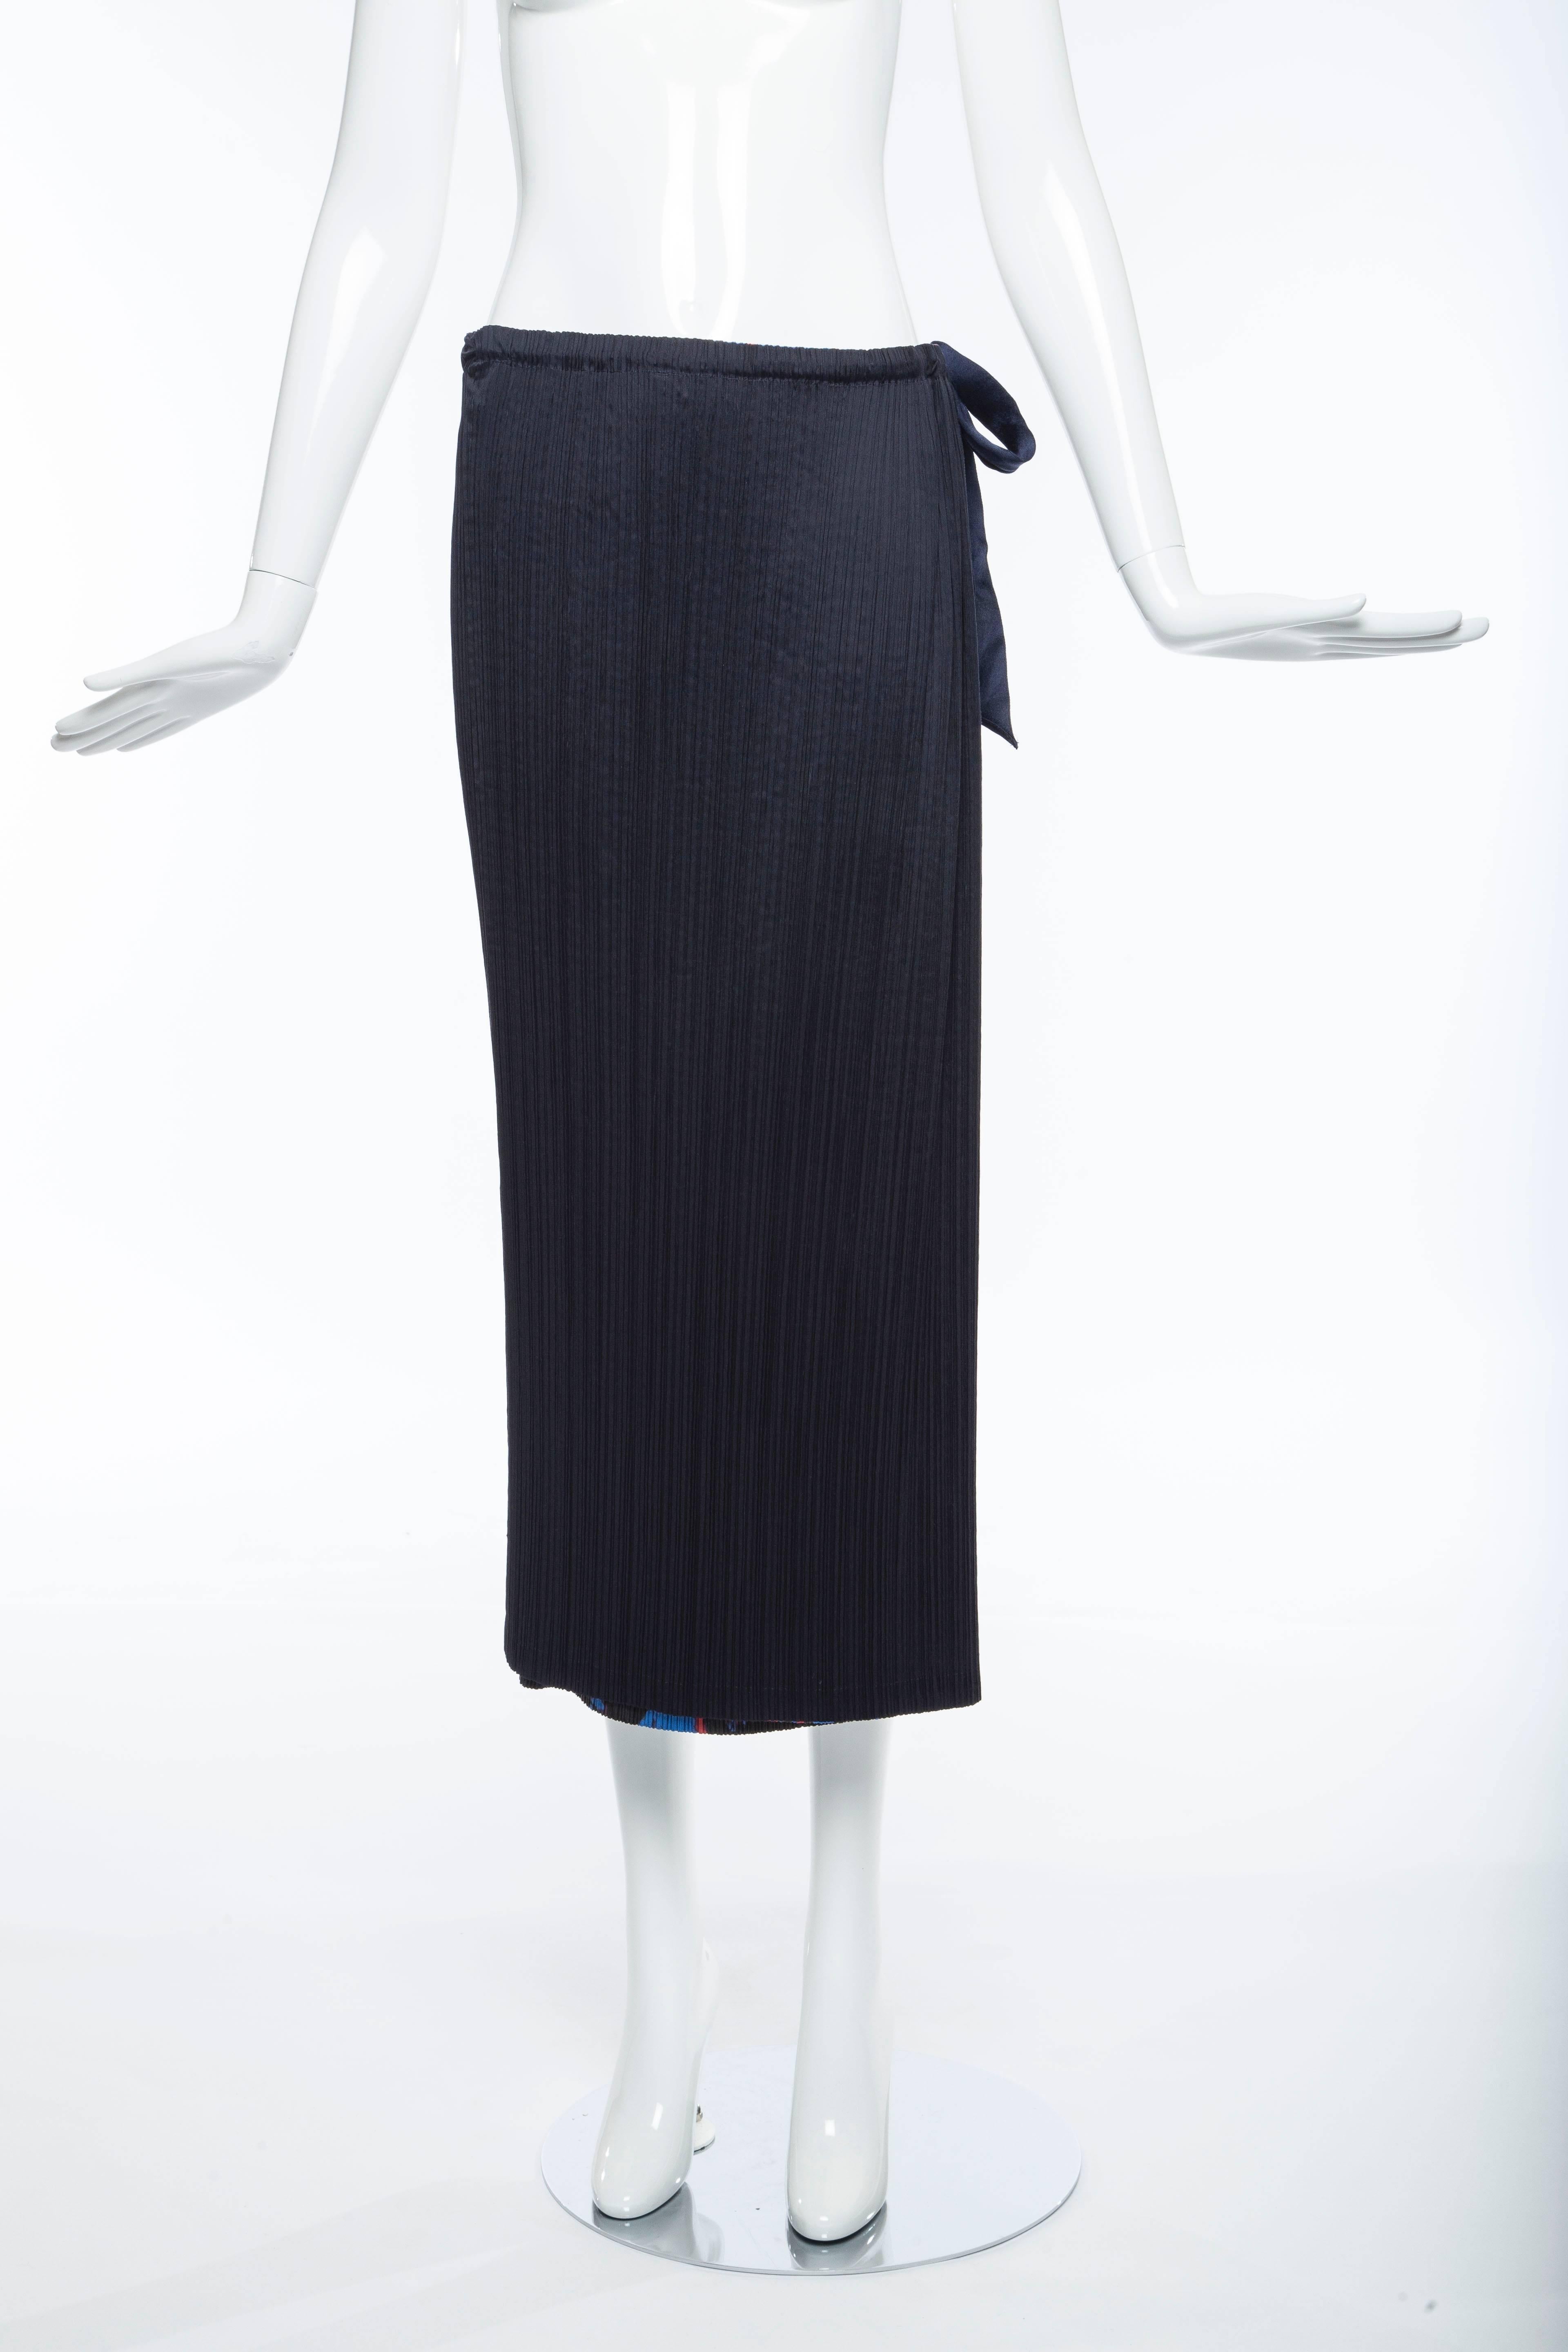 Issey Miyake Navy Blue Printed Silk Pleated Skirt,  Spring 2007 For Sale 1